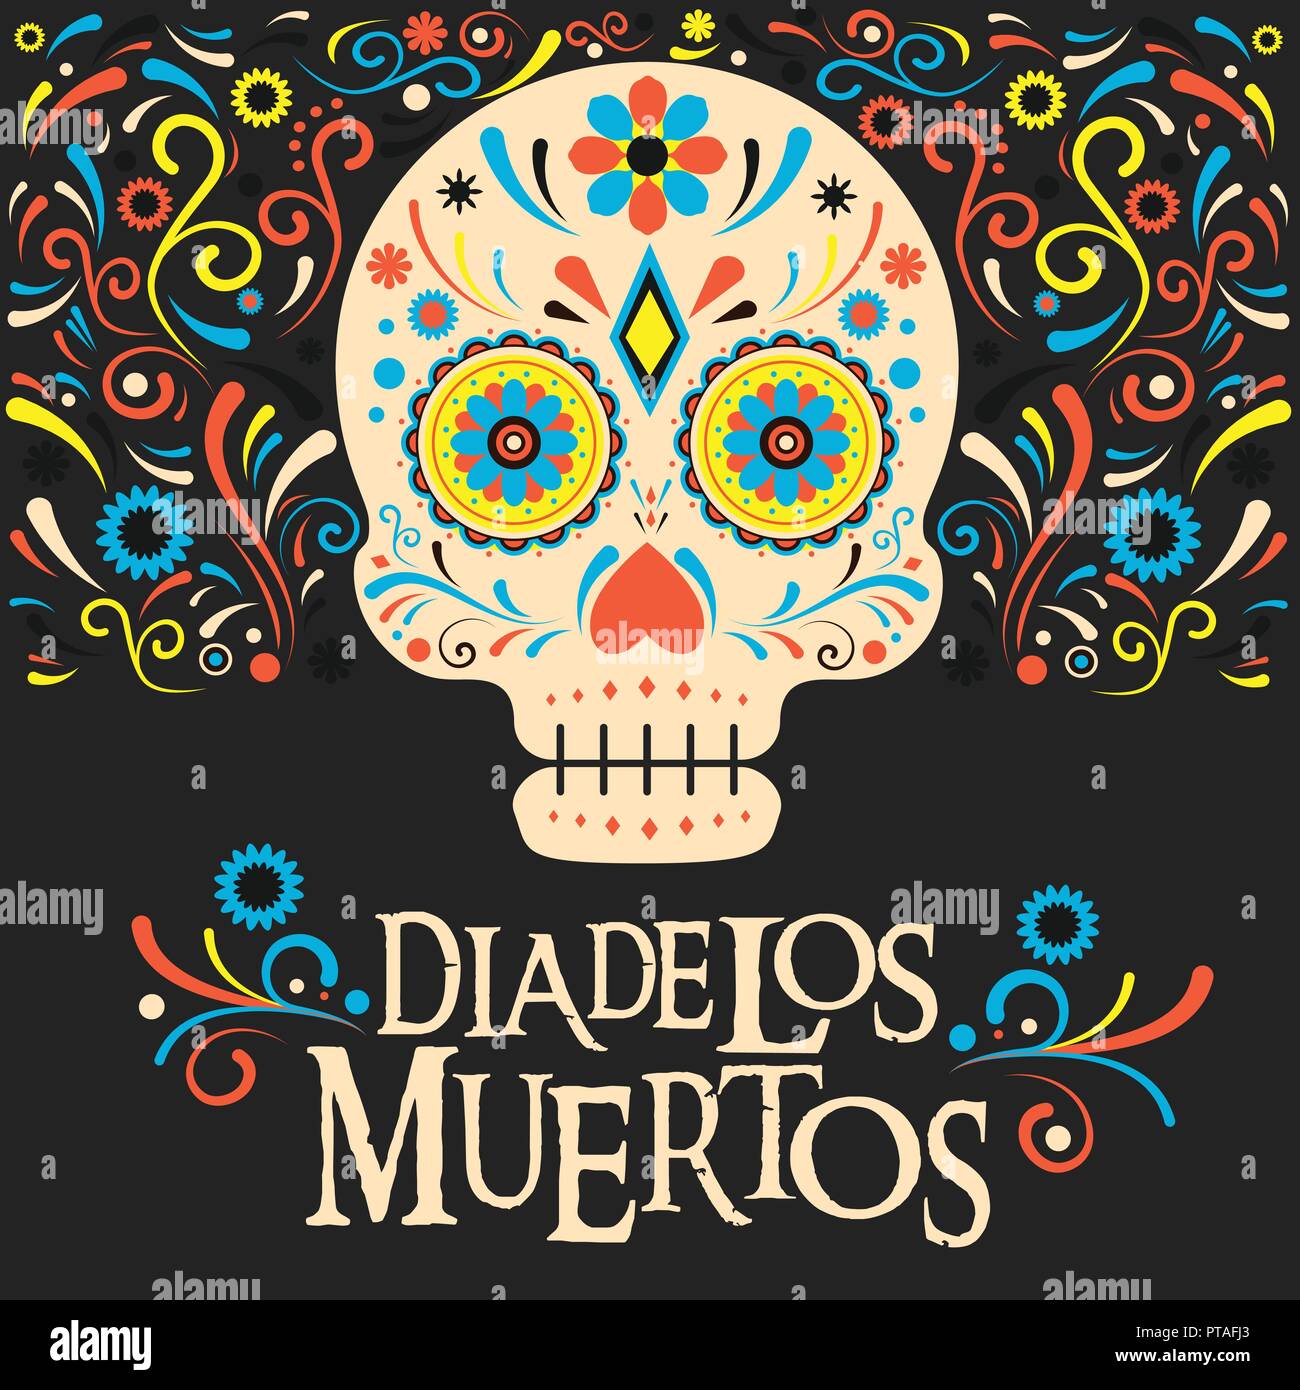 Mexico day of the dead poster design vector illustration Stock Vector